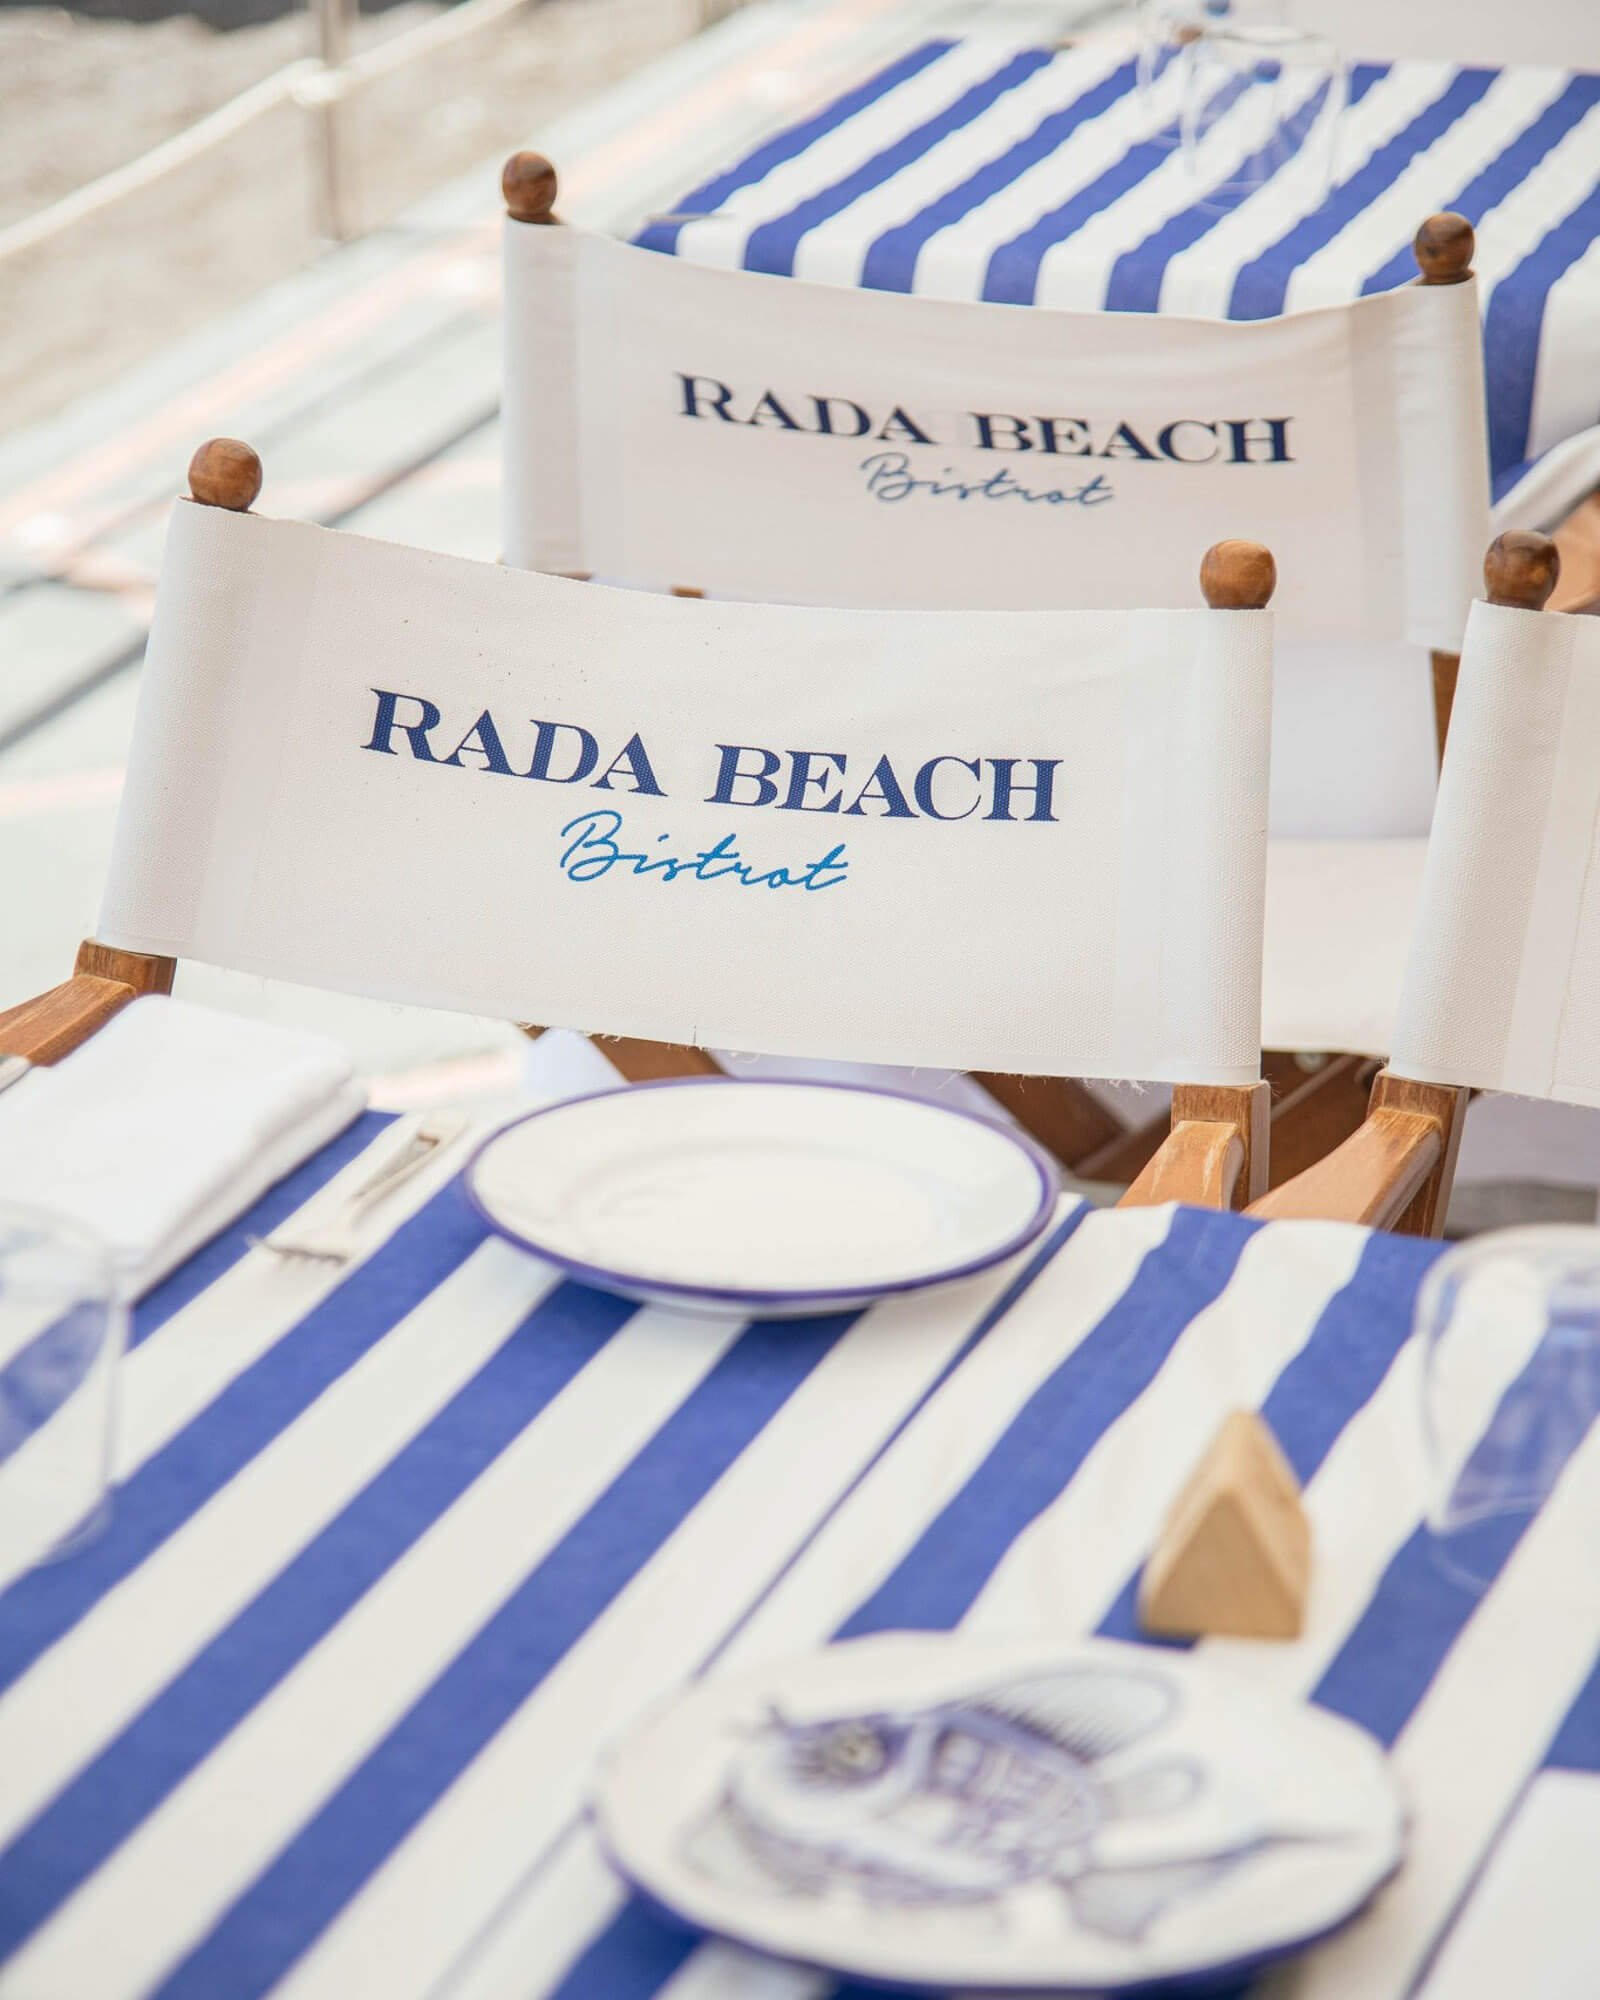 If you're in the mood for an upscale lunch at a  restaurant Positano, go to Rada Beach Bistrot.